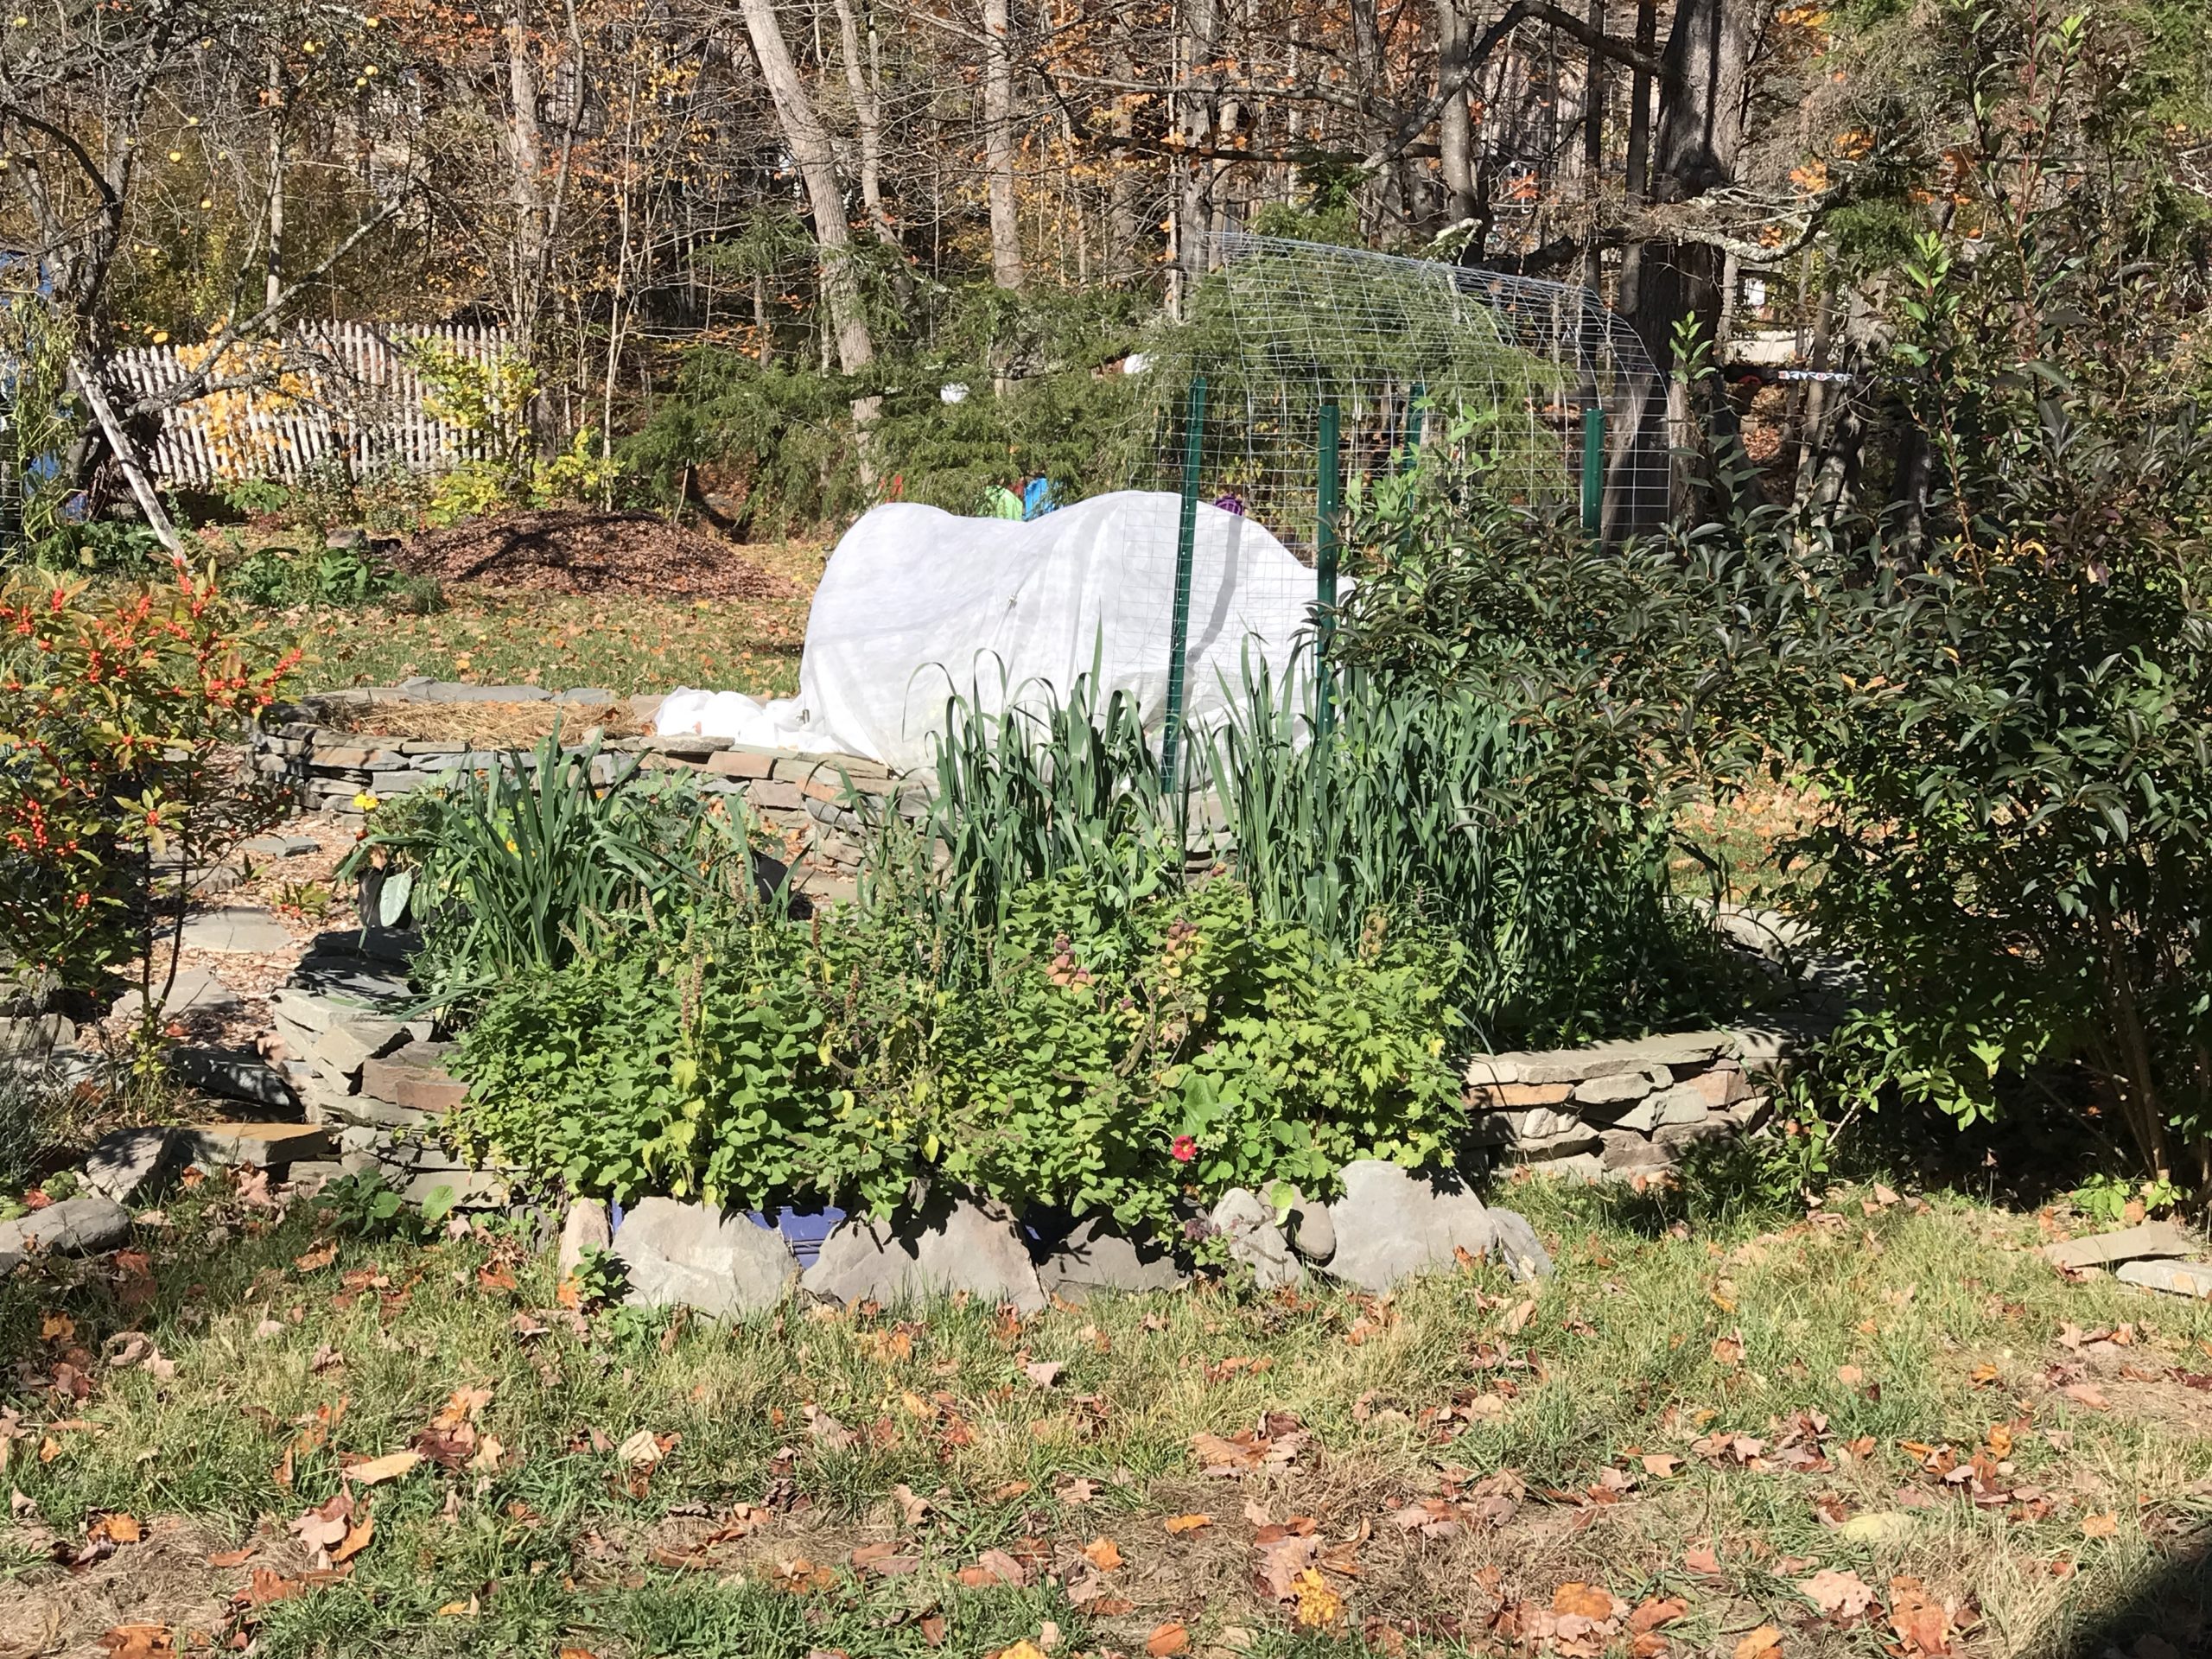 On the more modest side, this family built whimsical stone enclosed beds for a variety of crops from leeks to peas and corn to tomatoes and potatoes and herbs.